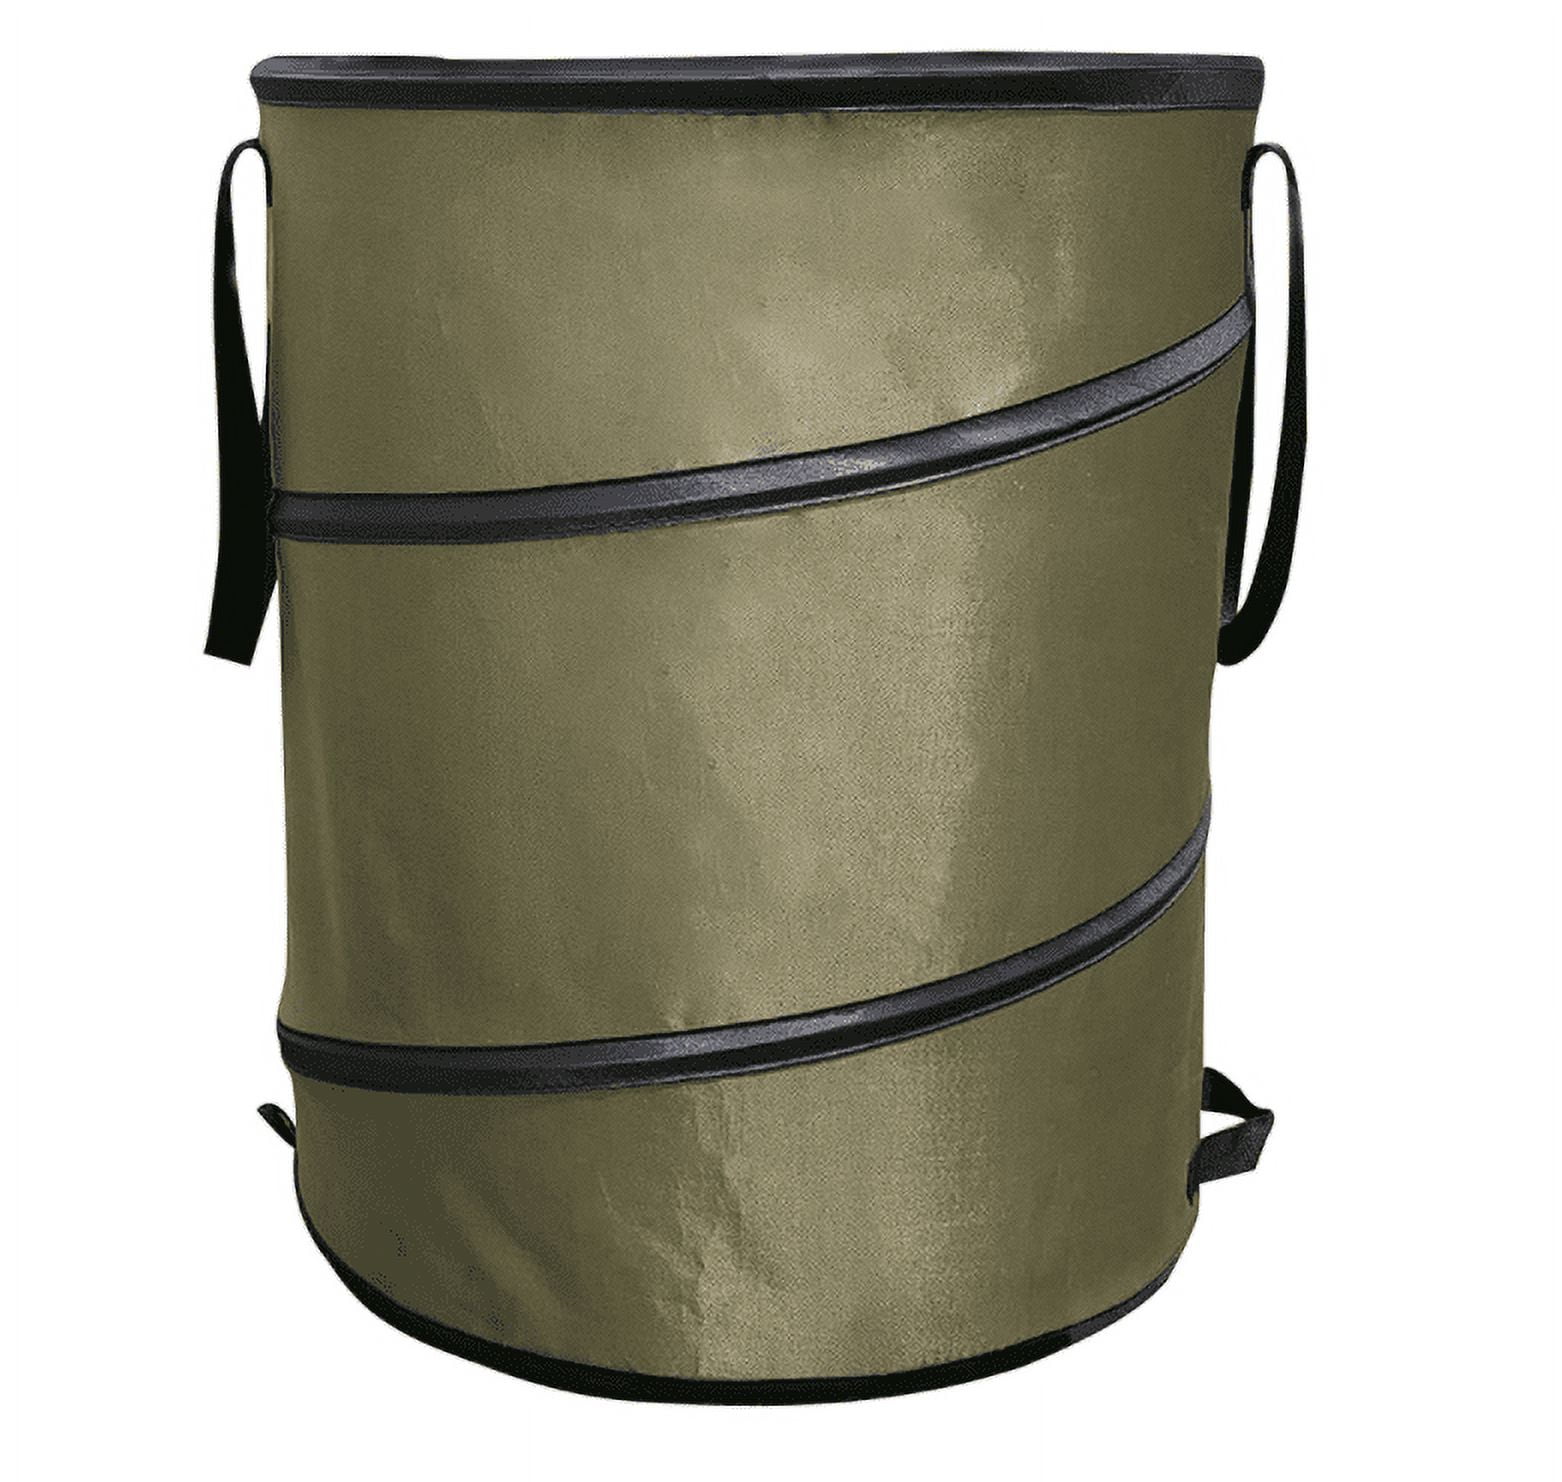 Collapsible Trash Can - Pop Up 44-gallon Outdoor Portable Garbage